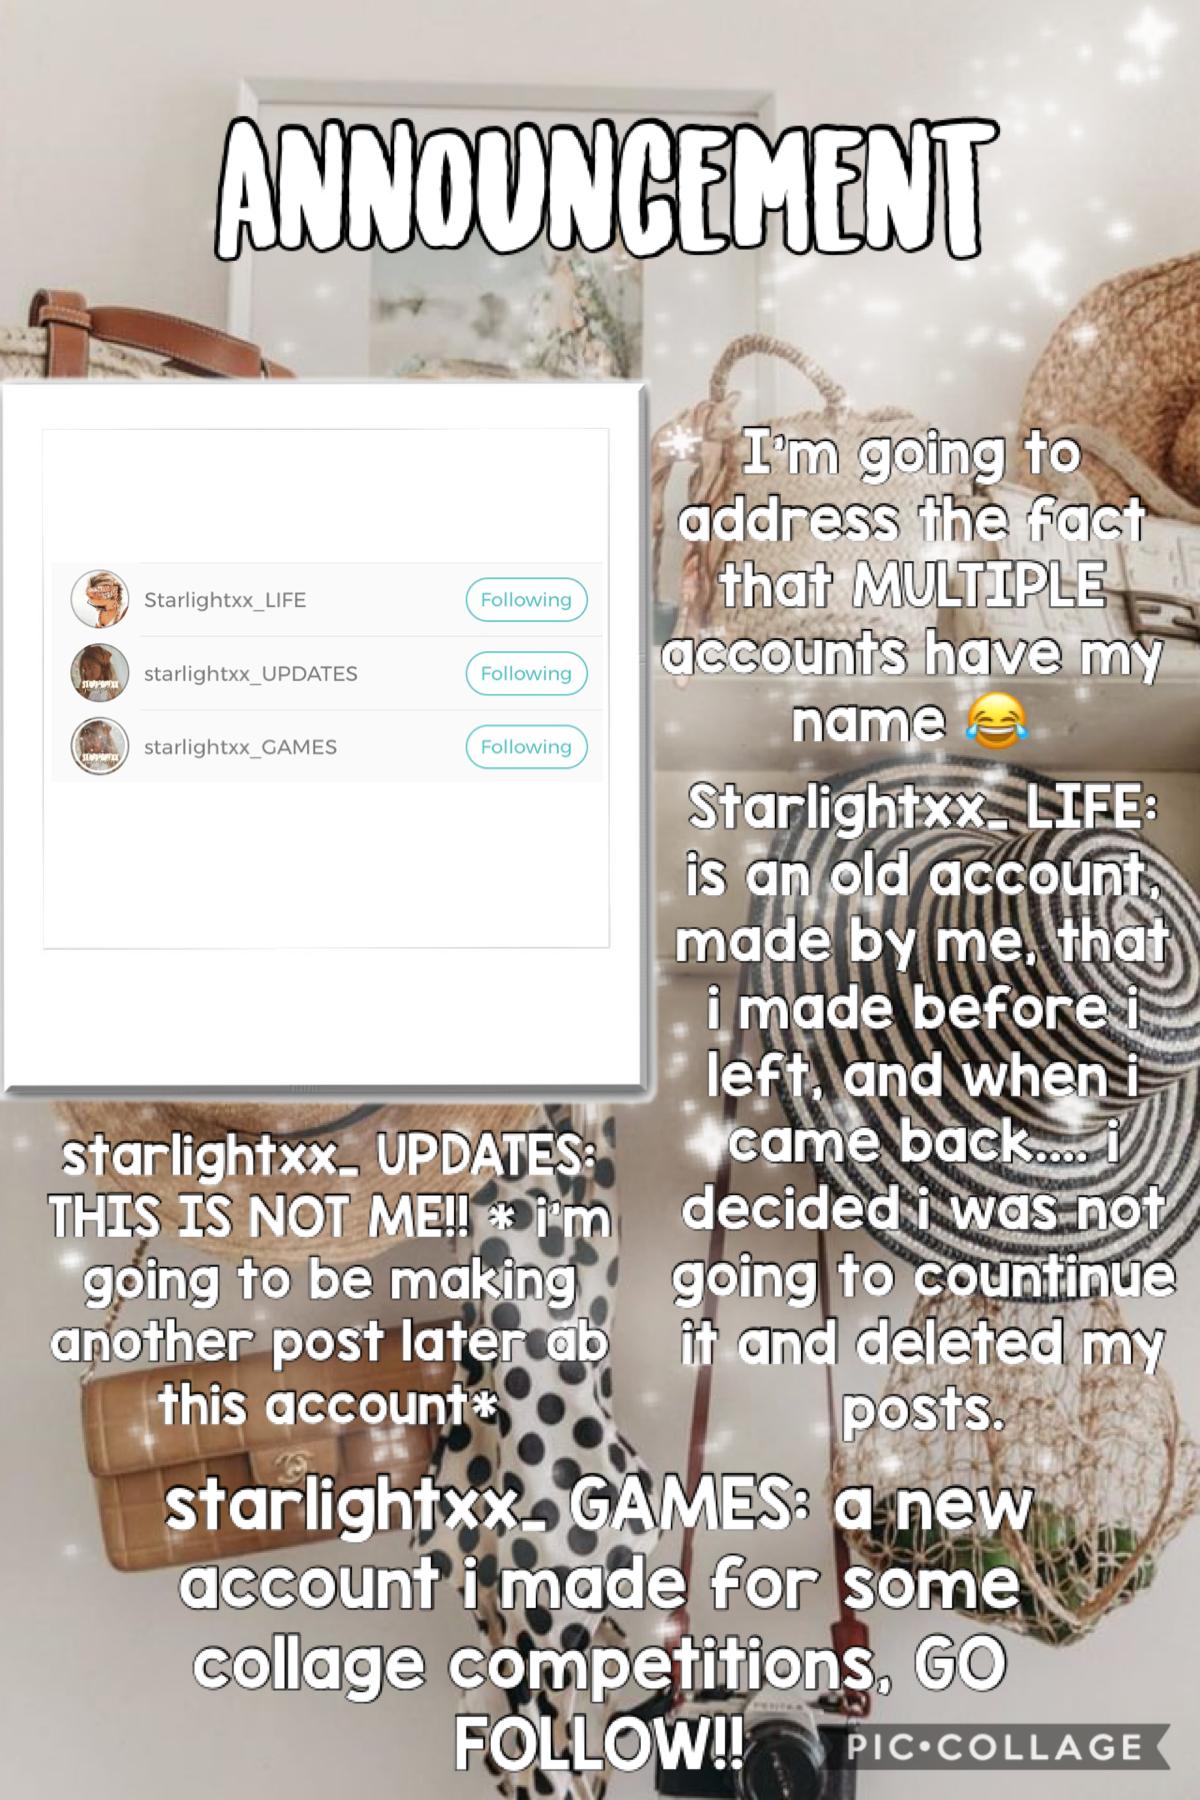 TAP

~recap~
starlightxx_ LIFE: old account i made, it’s not active but you can follow if you want!

starlightxx_UPDATES: this is not me, i’m going to make another post about this person later probably.

starlightxx_ GAMES: i made this for some collage co